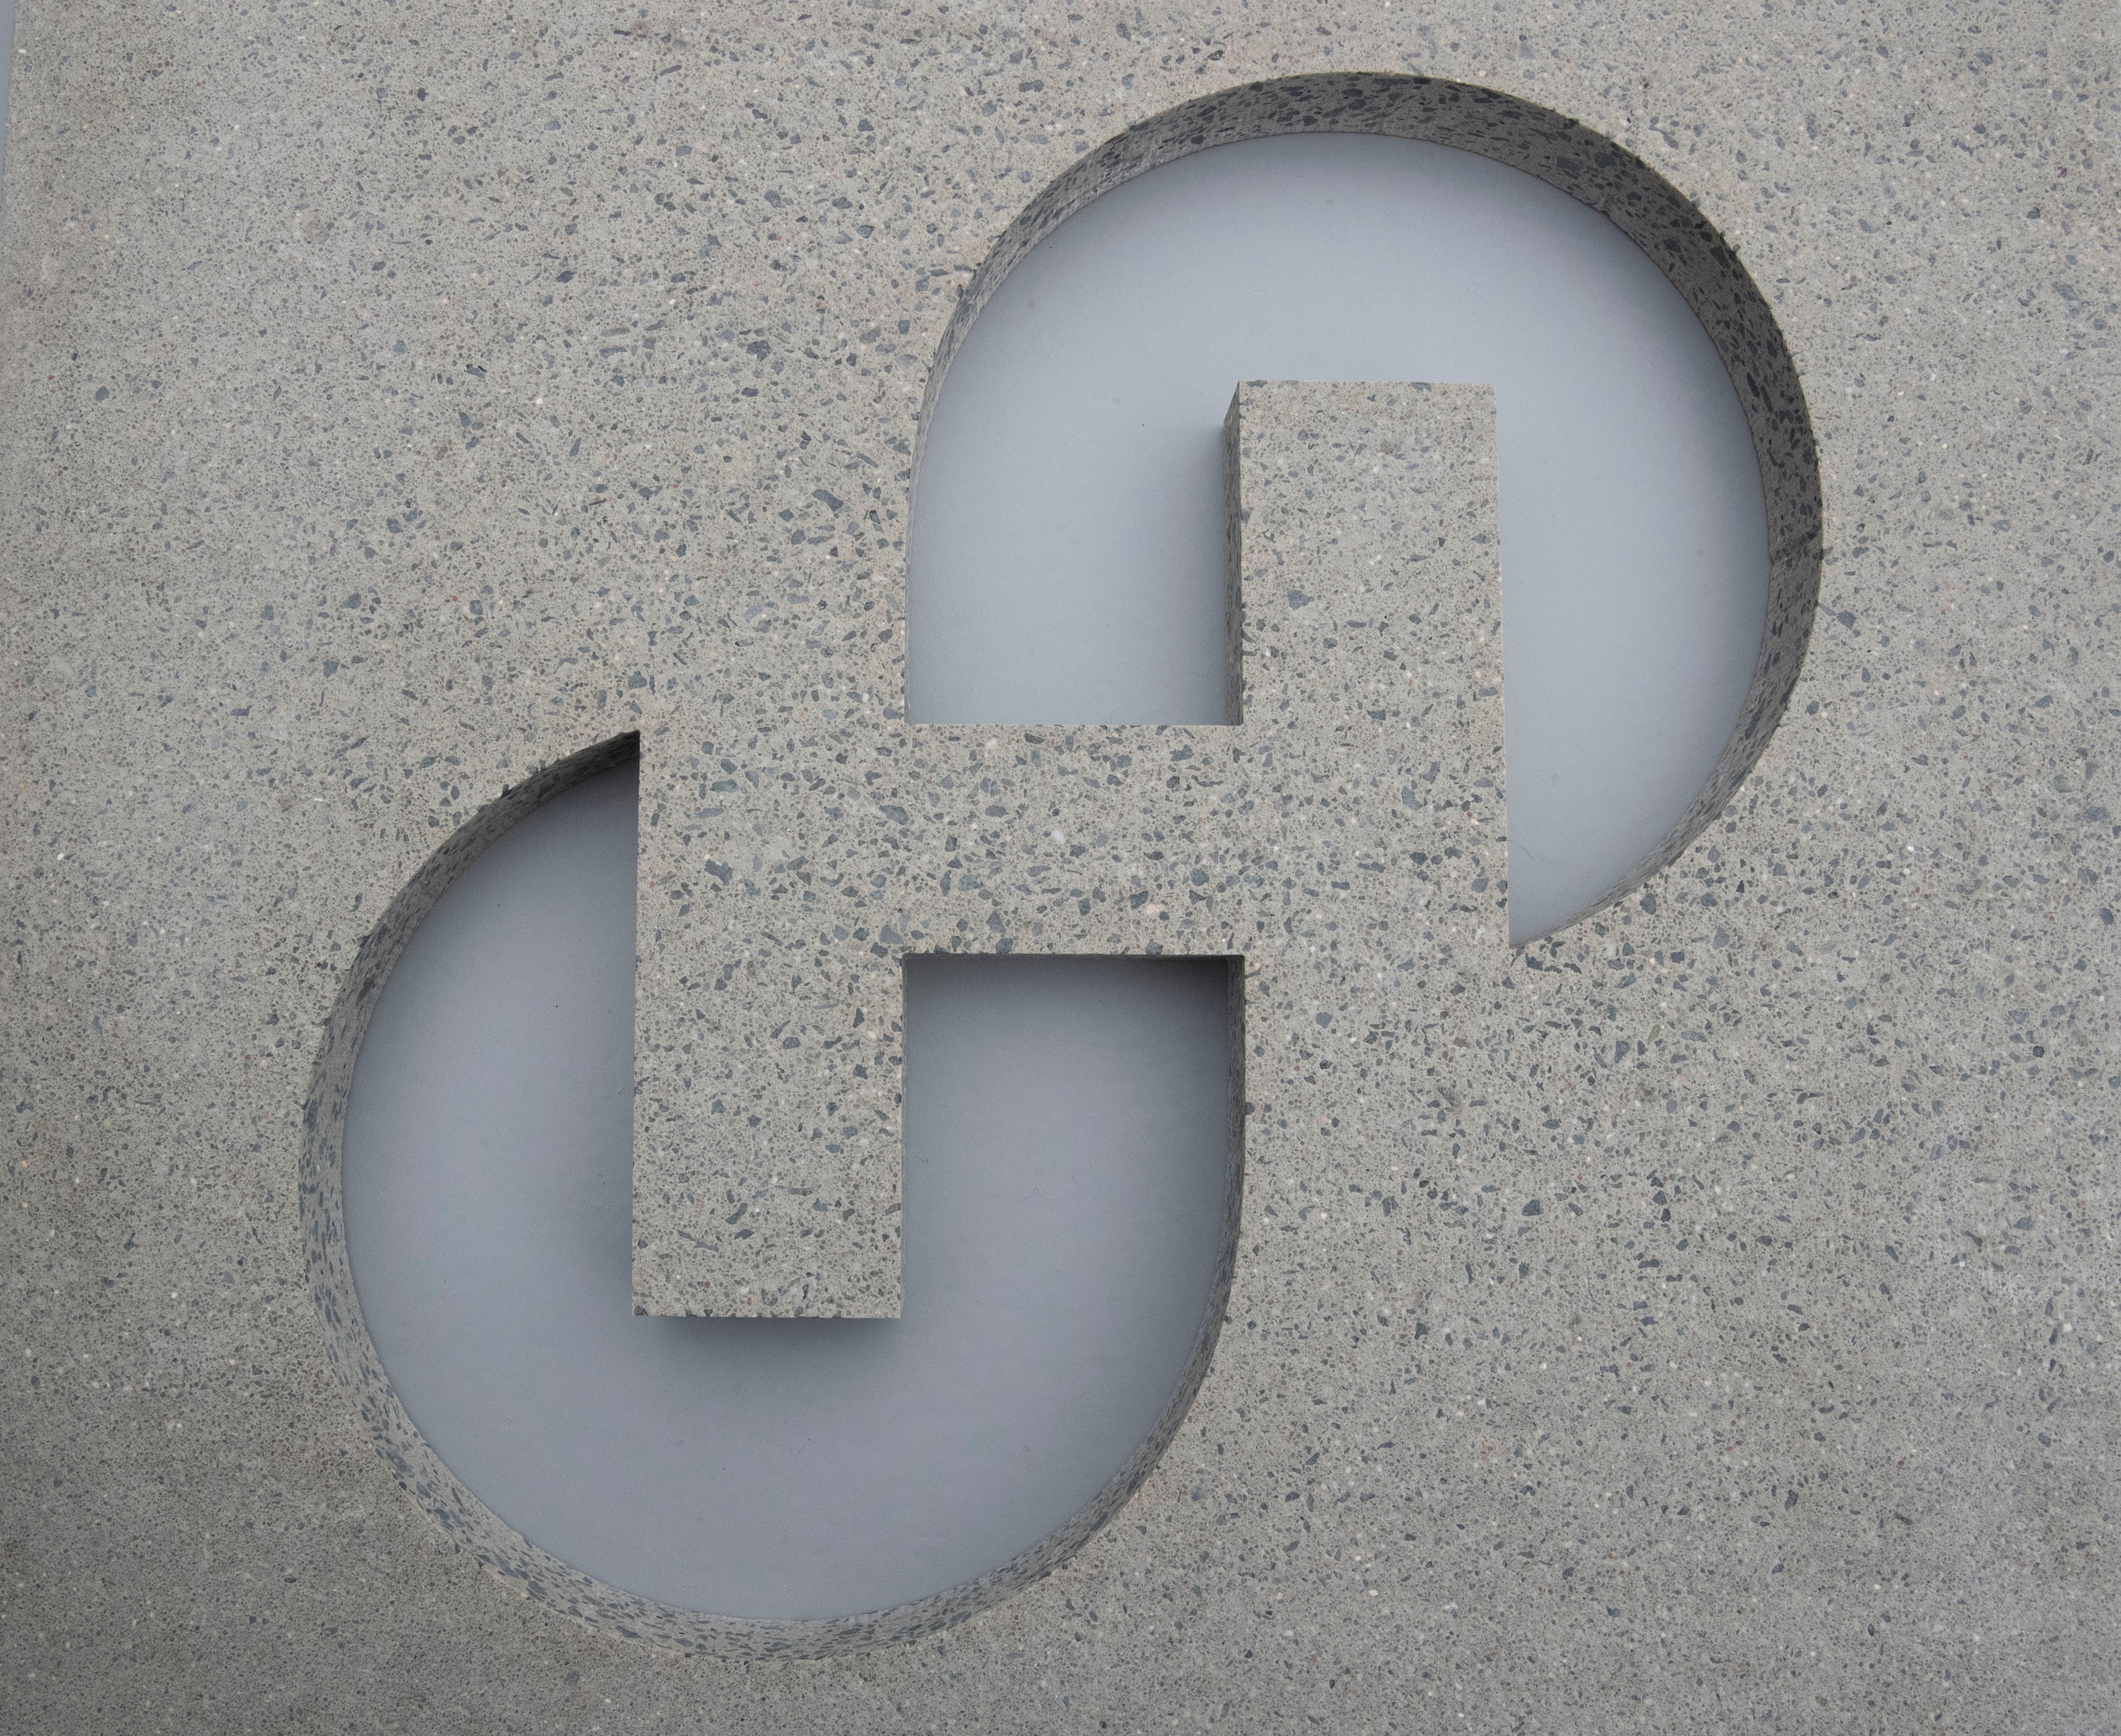 The new logo of Swiss cement maker Holcim is seen in a block of concrete during the Holcim Capital Markets Day event in Basel, Switzerland November 18, 2021. REUTERS/Arnd Wiegmann